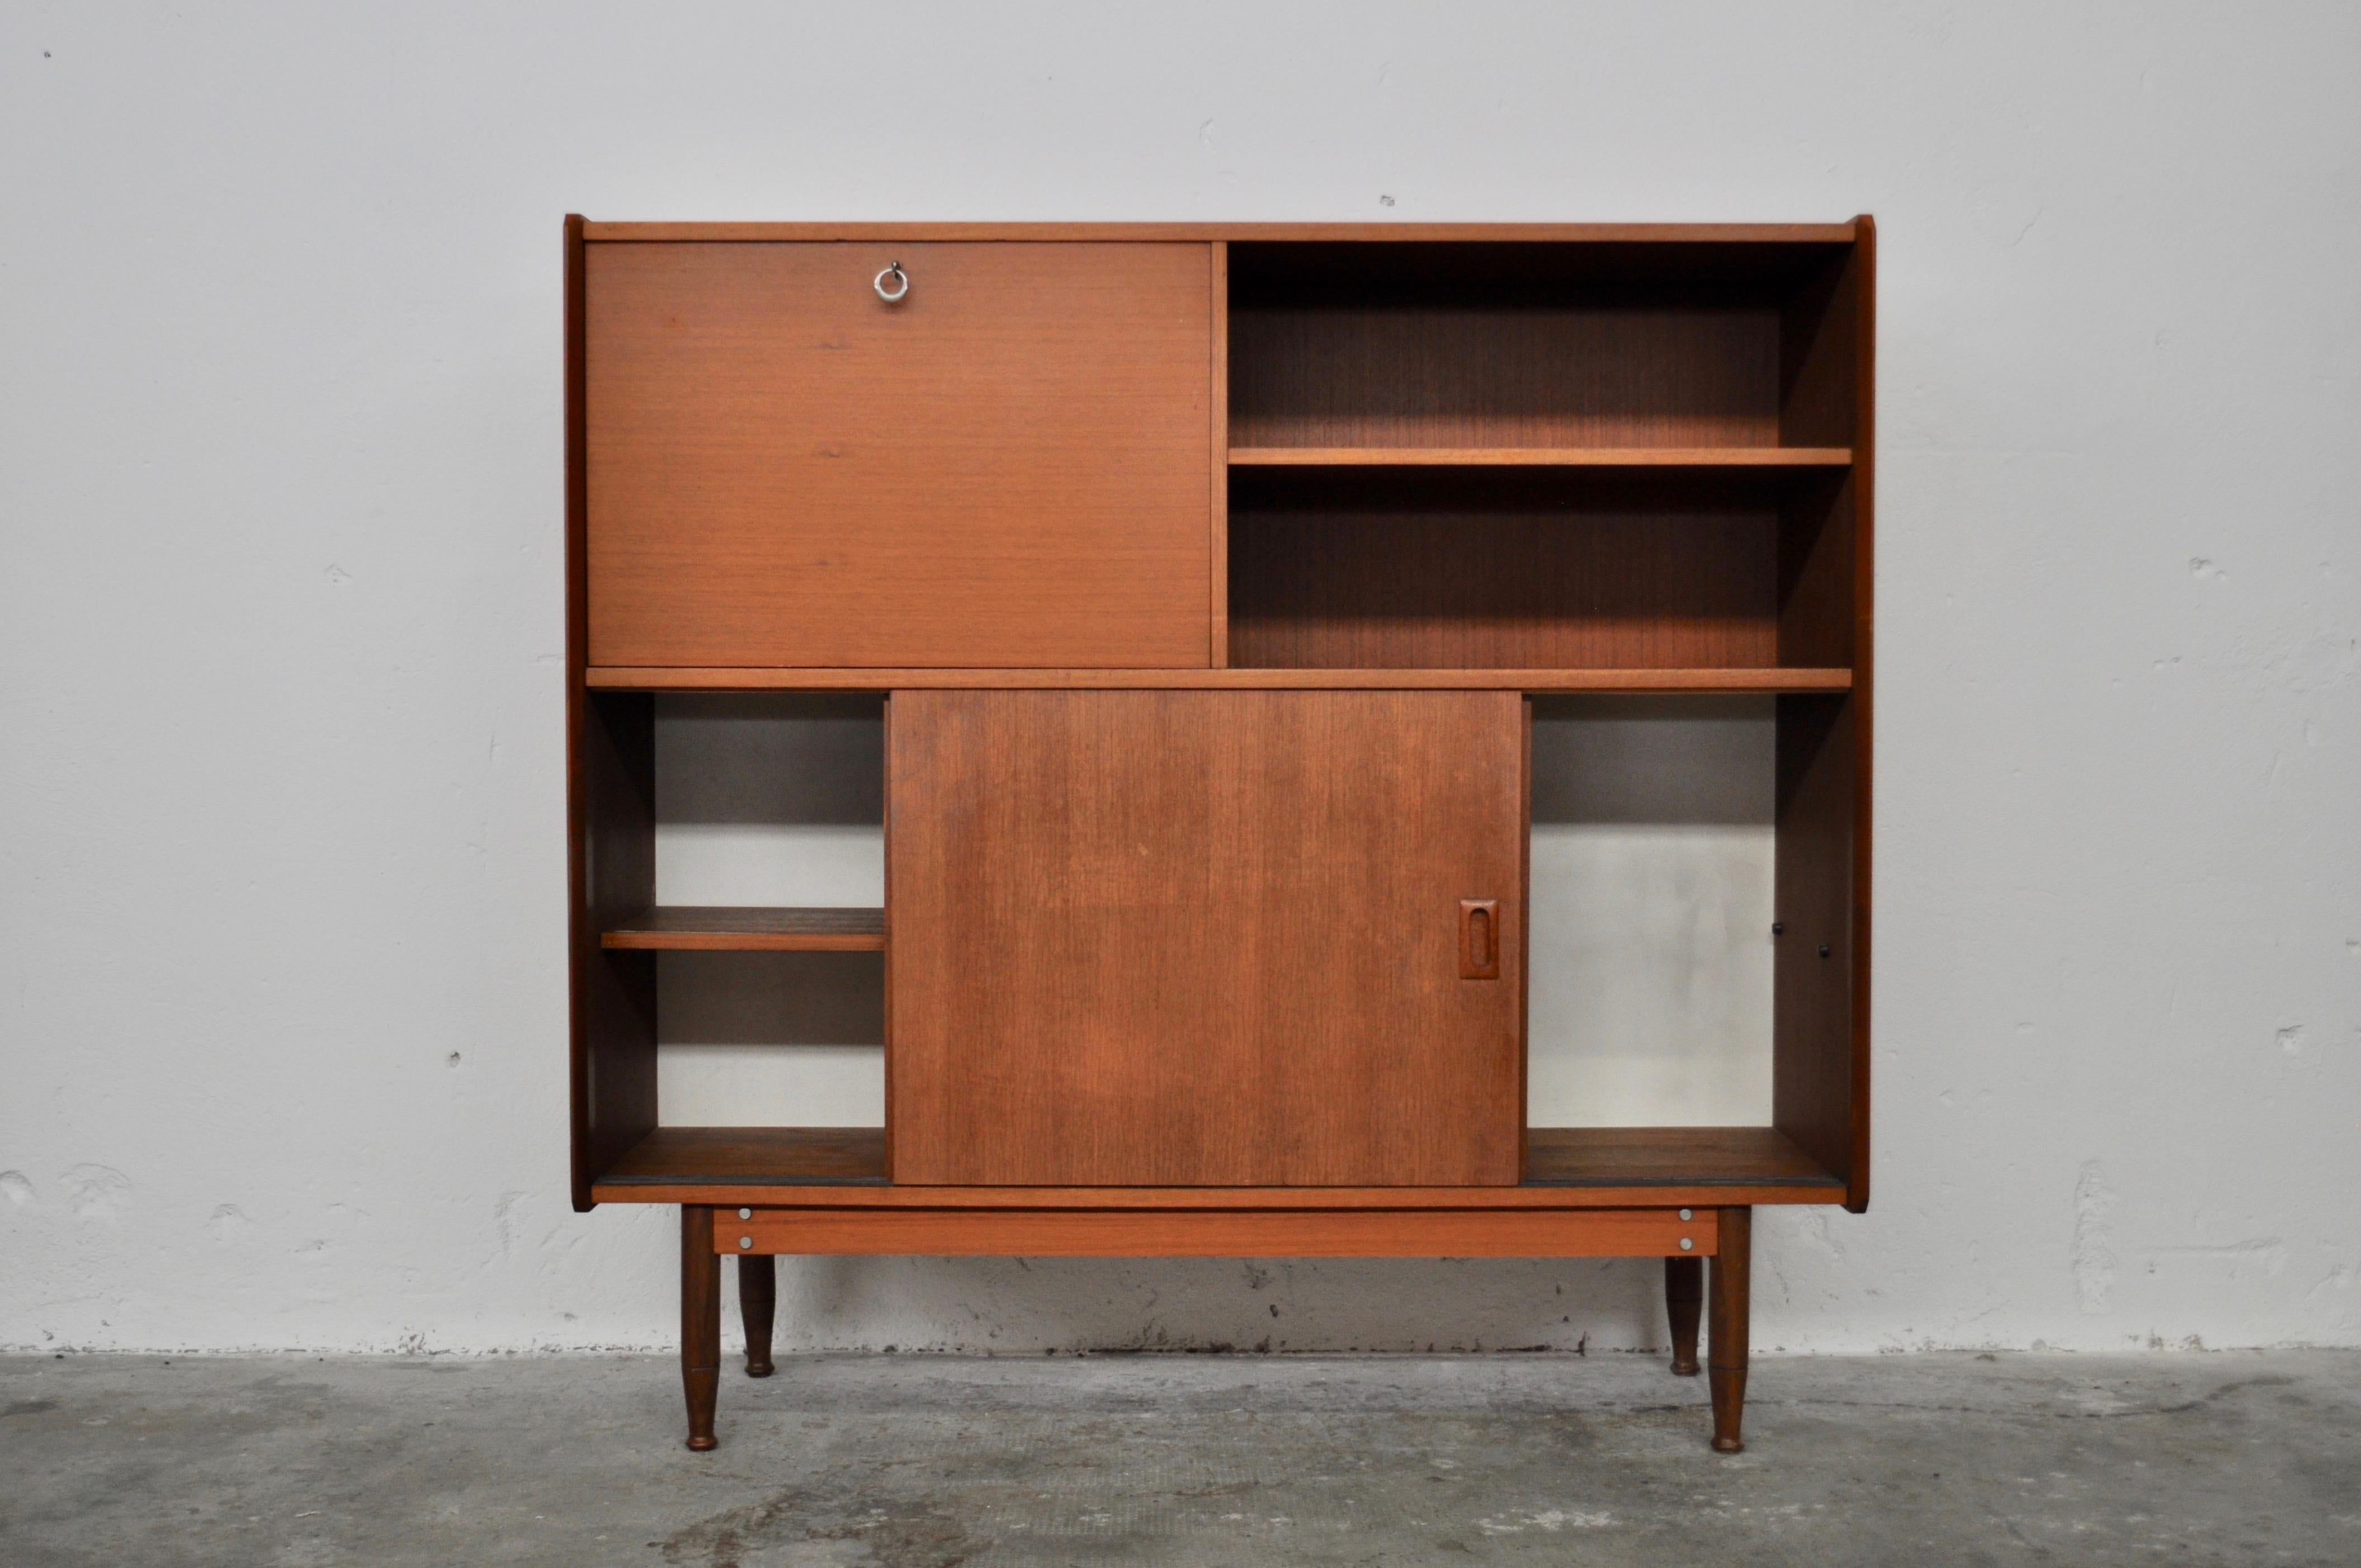 With sliding doors and internal shelves. Leg structure in teak wood. Perfect condition. Country of origin Danish.